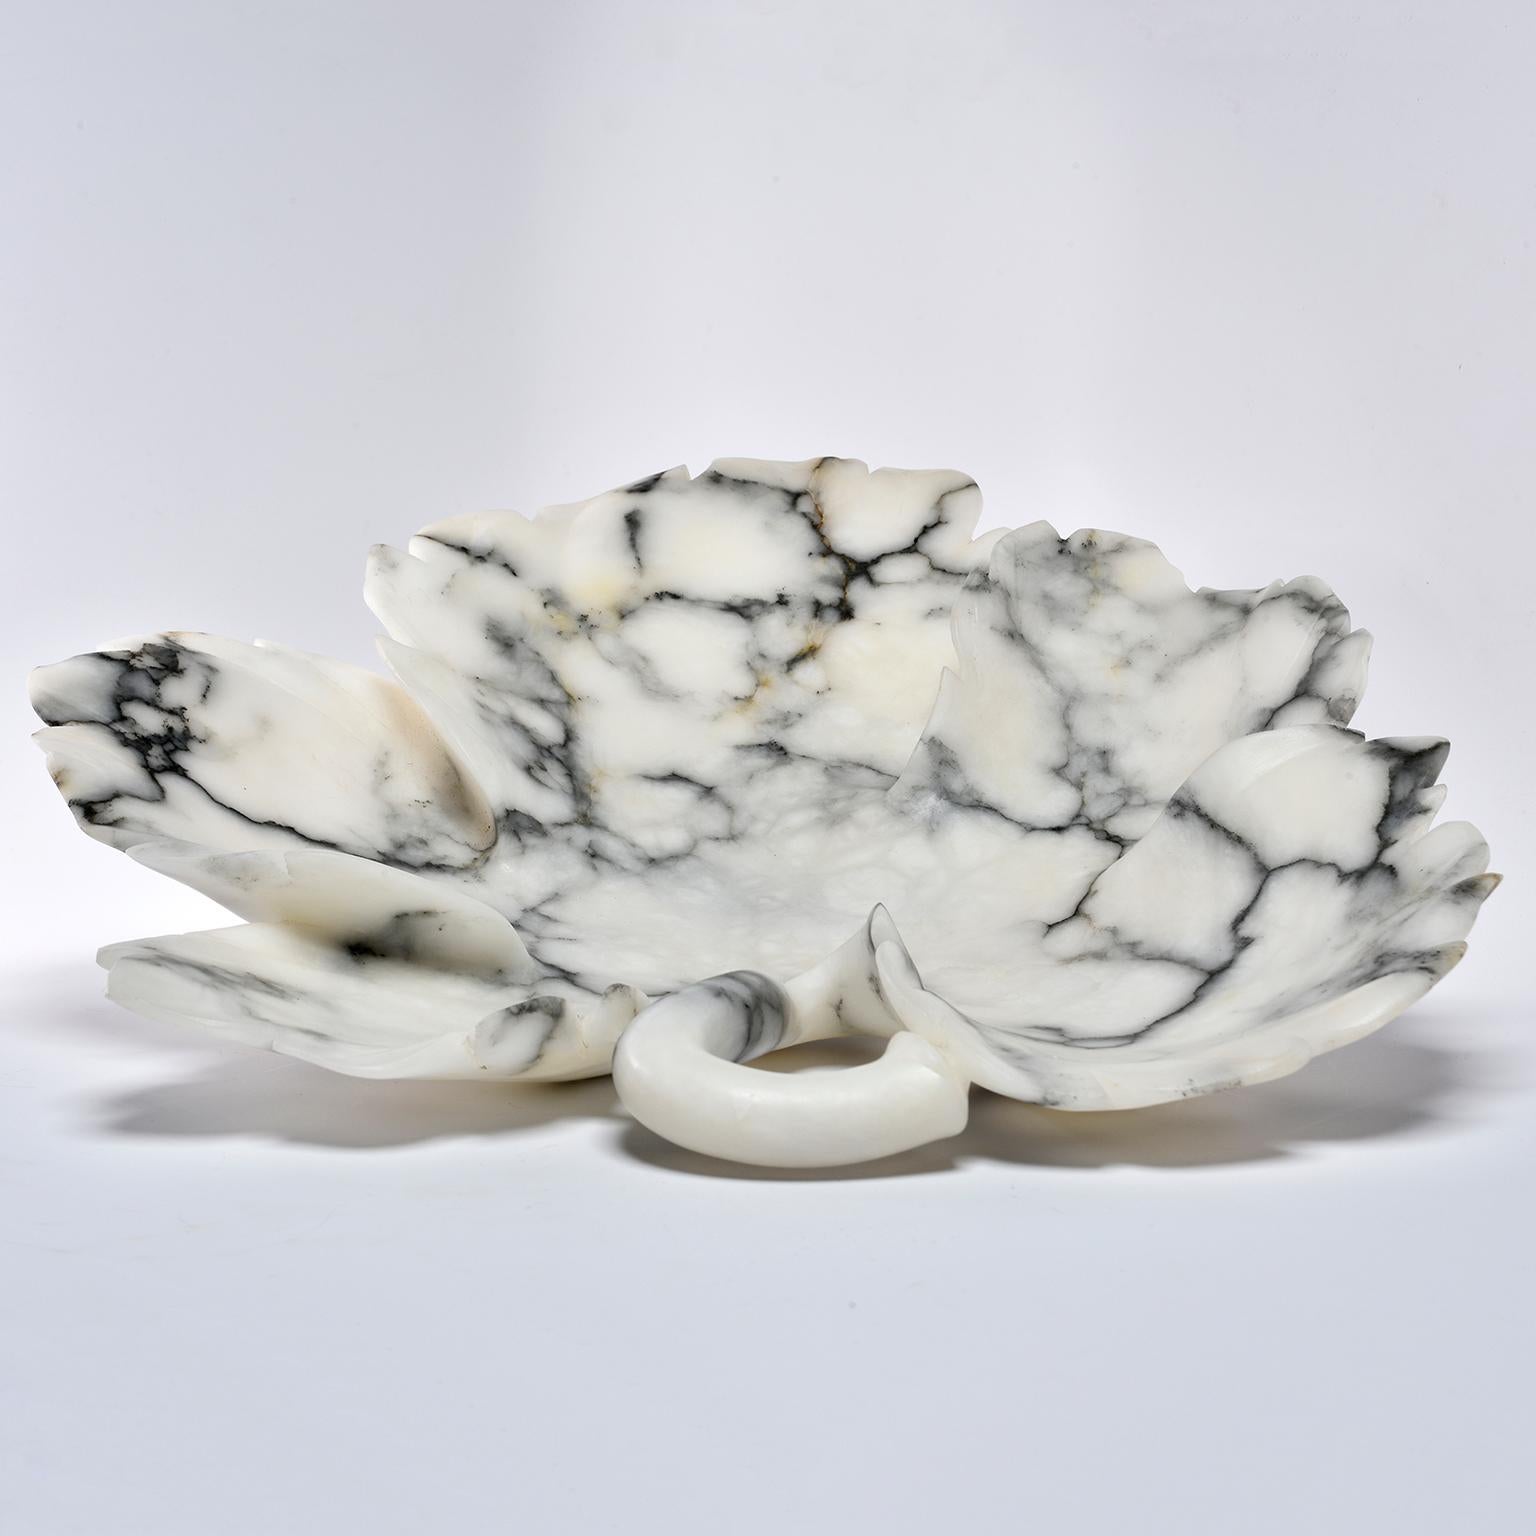 Custom made for us in Italy, this white alabaster platter or shallow bowl has gray veining and is in the form of a leaf.